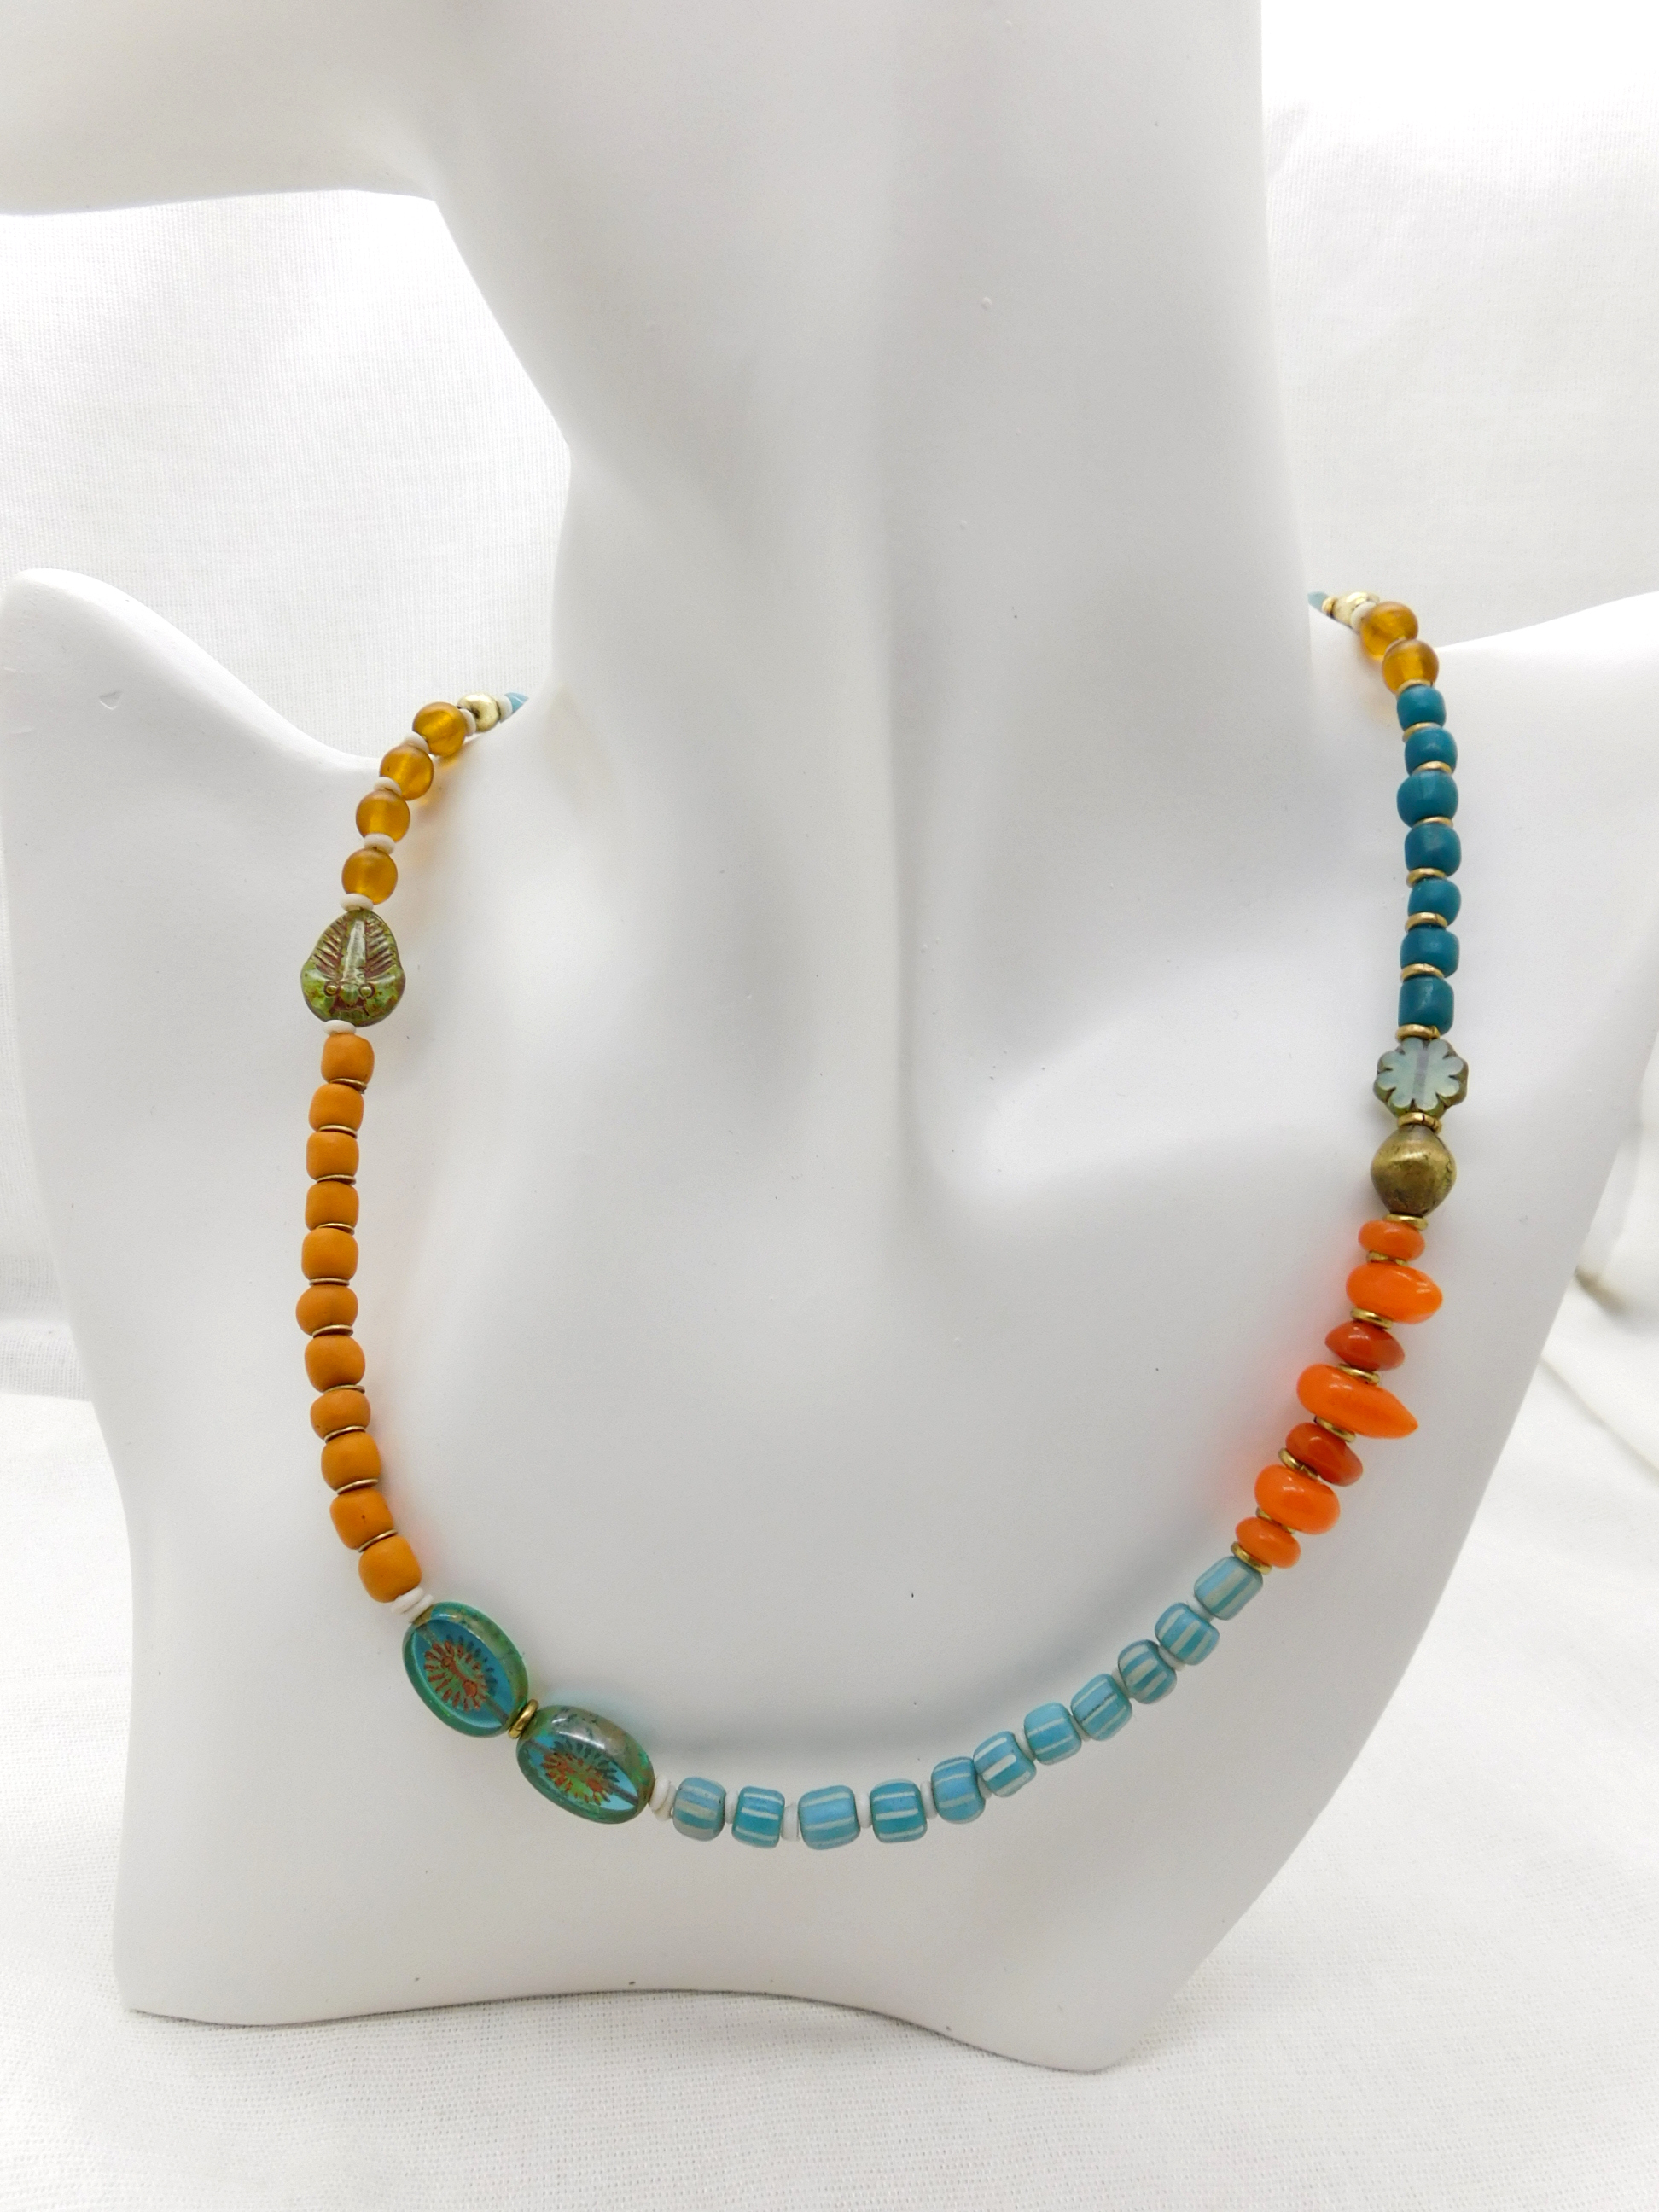 necklace with ethnical glass beads mix - orange turquoise blue